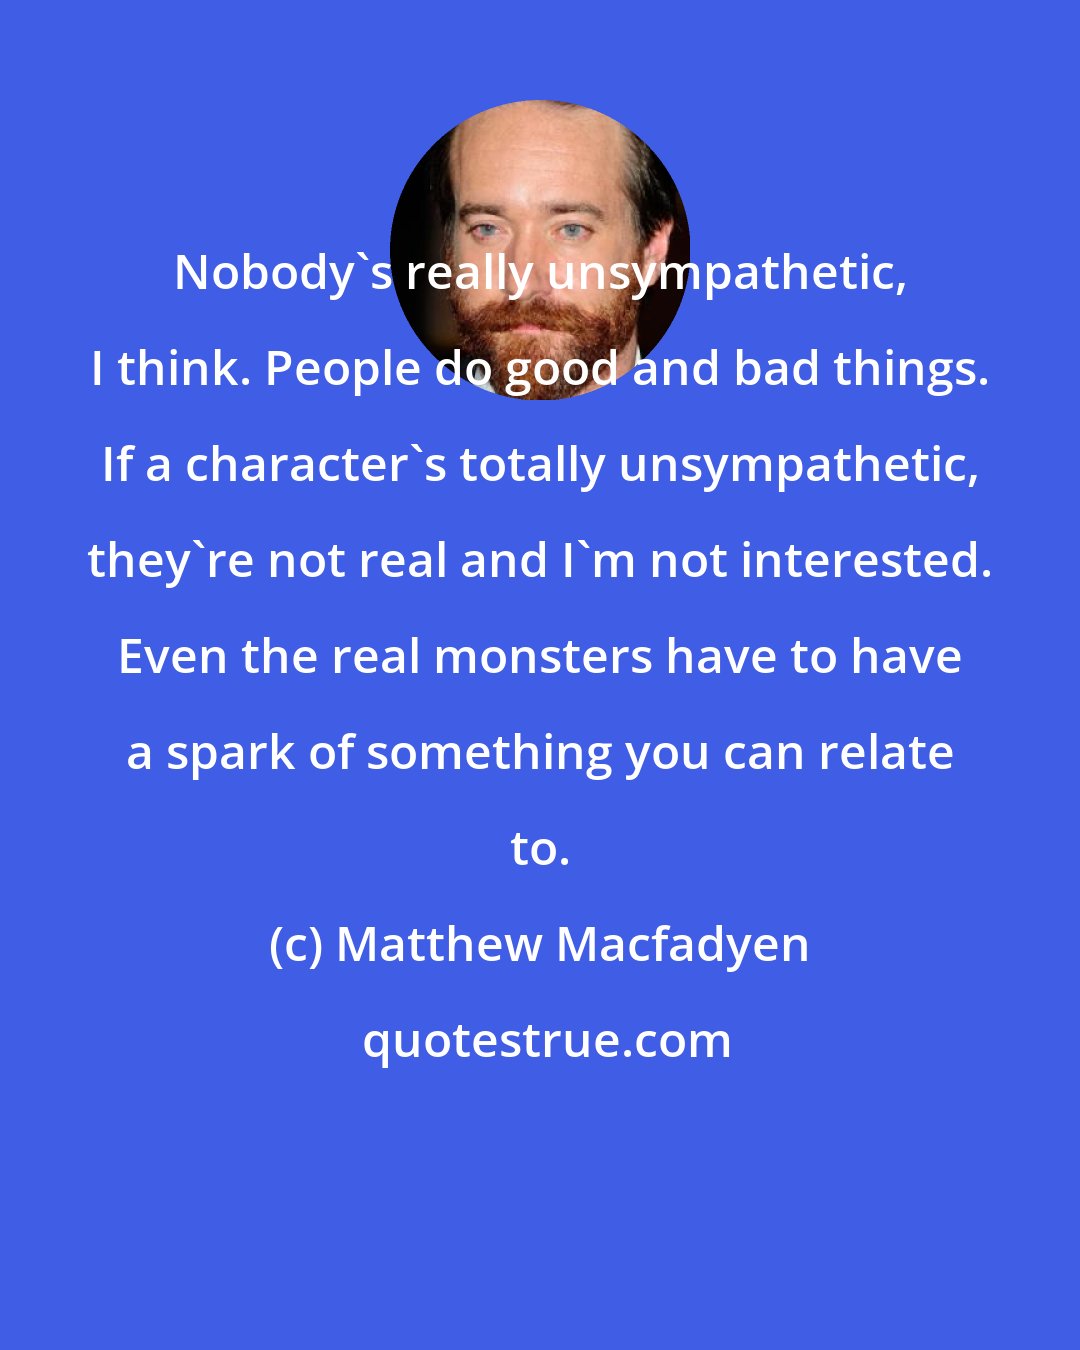 Matthew Macfadyen: Nobody's really unsympathetic, I think. People do good and bad things. If a character's totally unsympathetic, they're not real and I'm not interested. Even the real monsters have to have a spark of something you can relate to.